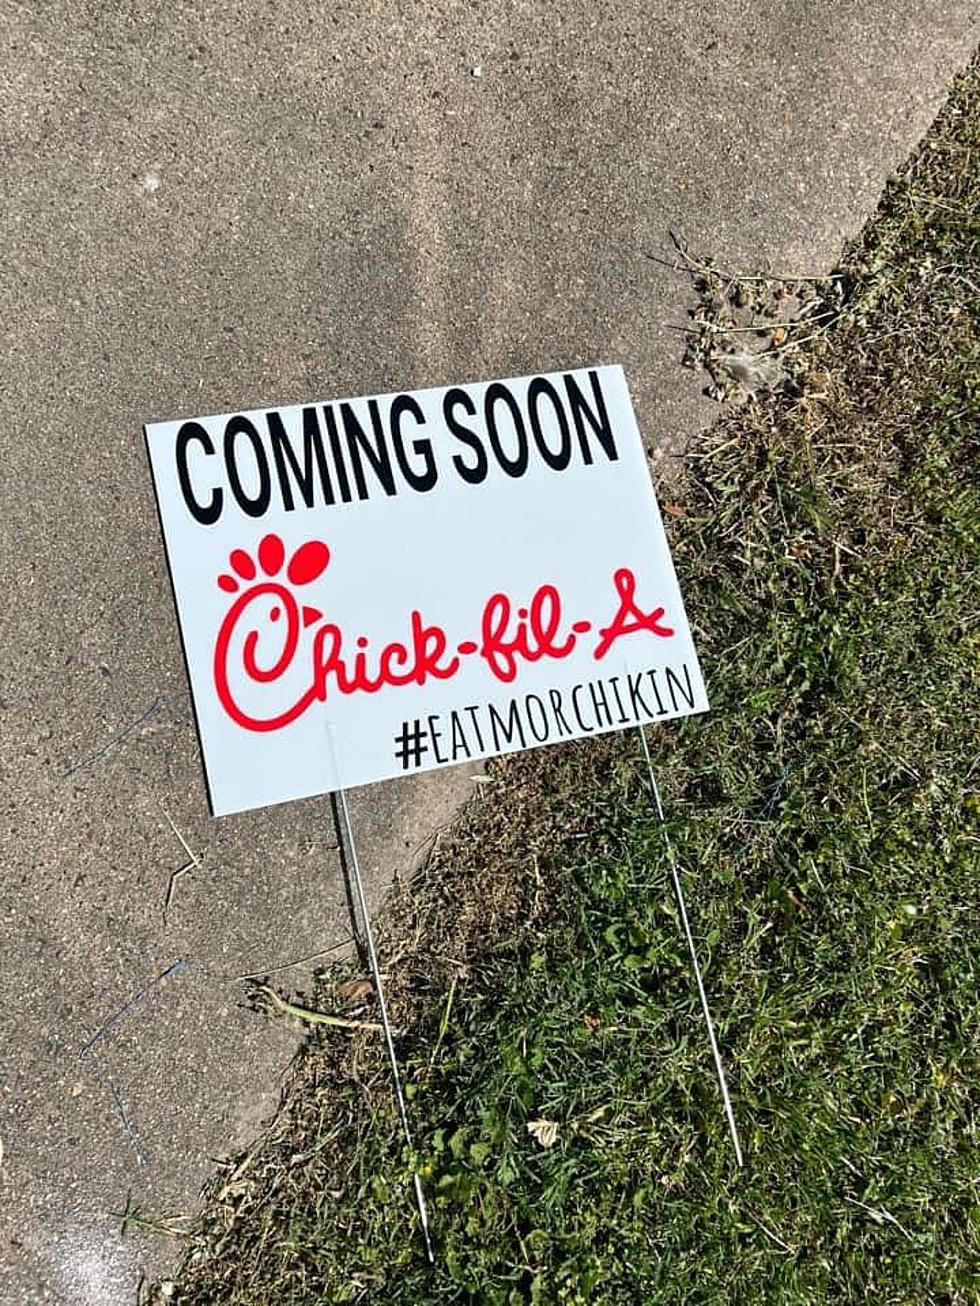 Pranksters Announce The Opening Of A Fake Chick-Fila Location